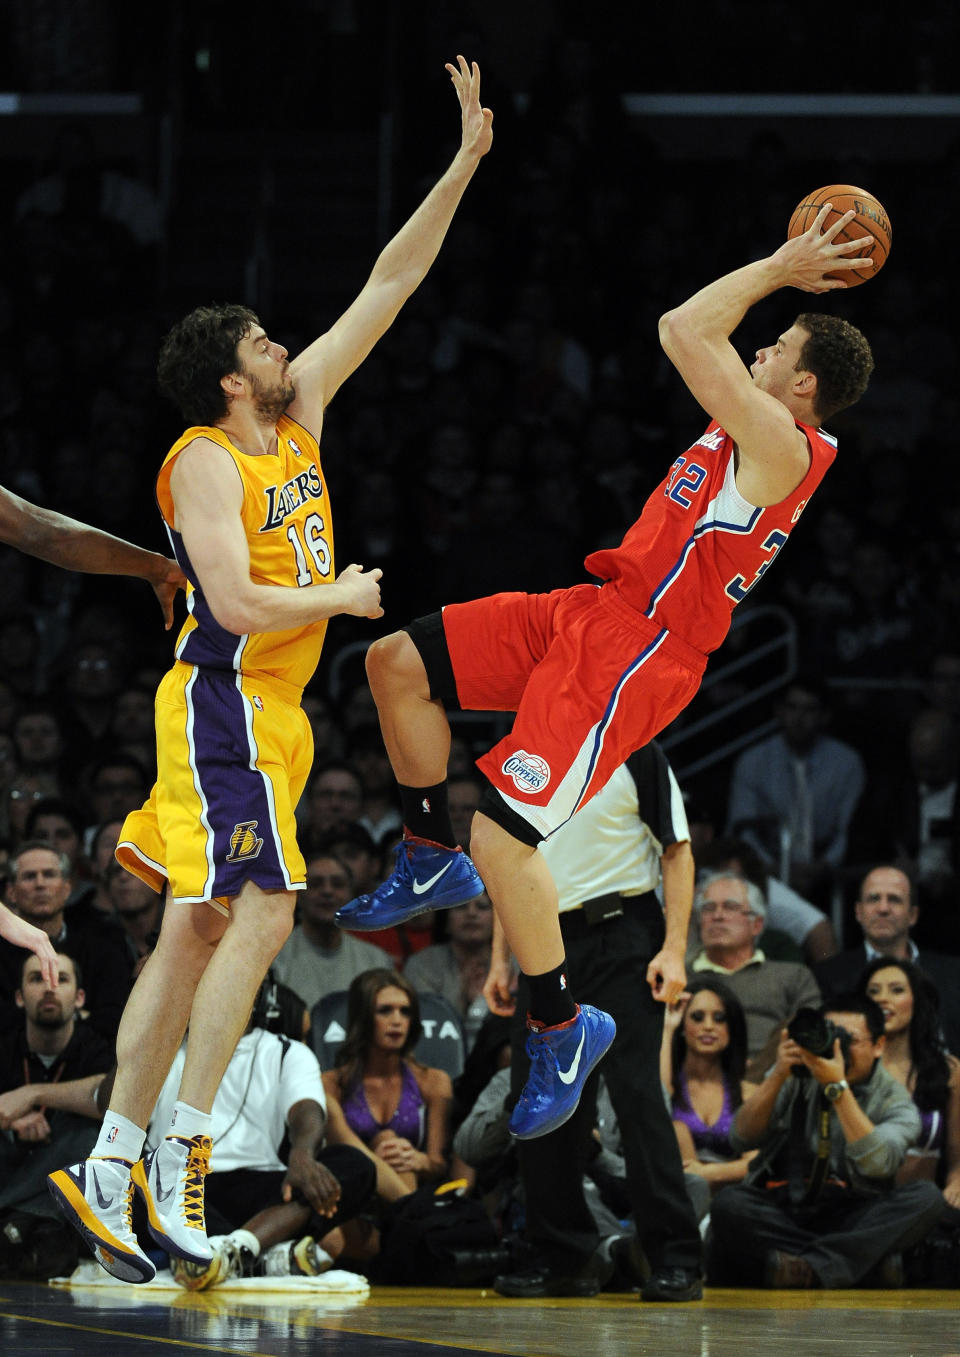 LOS ANGELES, CA - DECEMBER 19: Blake Griffin #32 of the Los Angeles Clippers shoots a fall away jumper from Pau Gasol #16 of the Los Angeles Lakers during the first half at Staples Center on December 19, 2011 in Los Angeles, California. (Photo by Harry How/Getty Images)